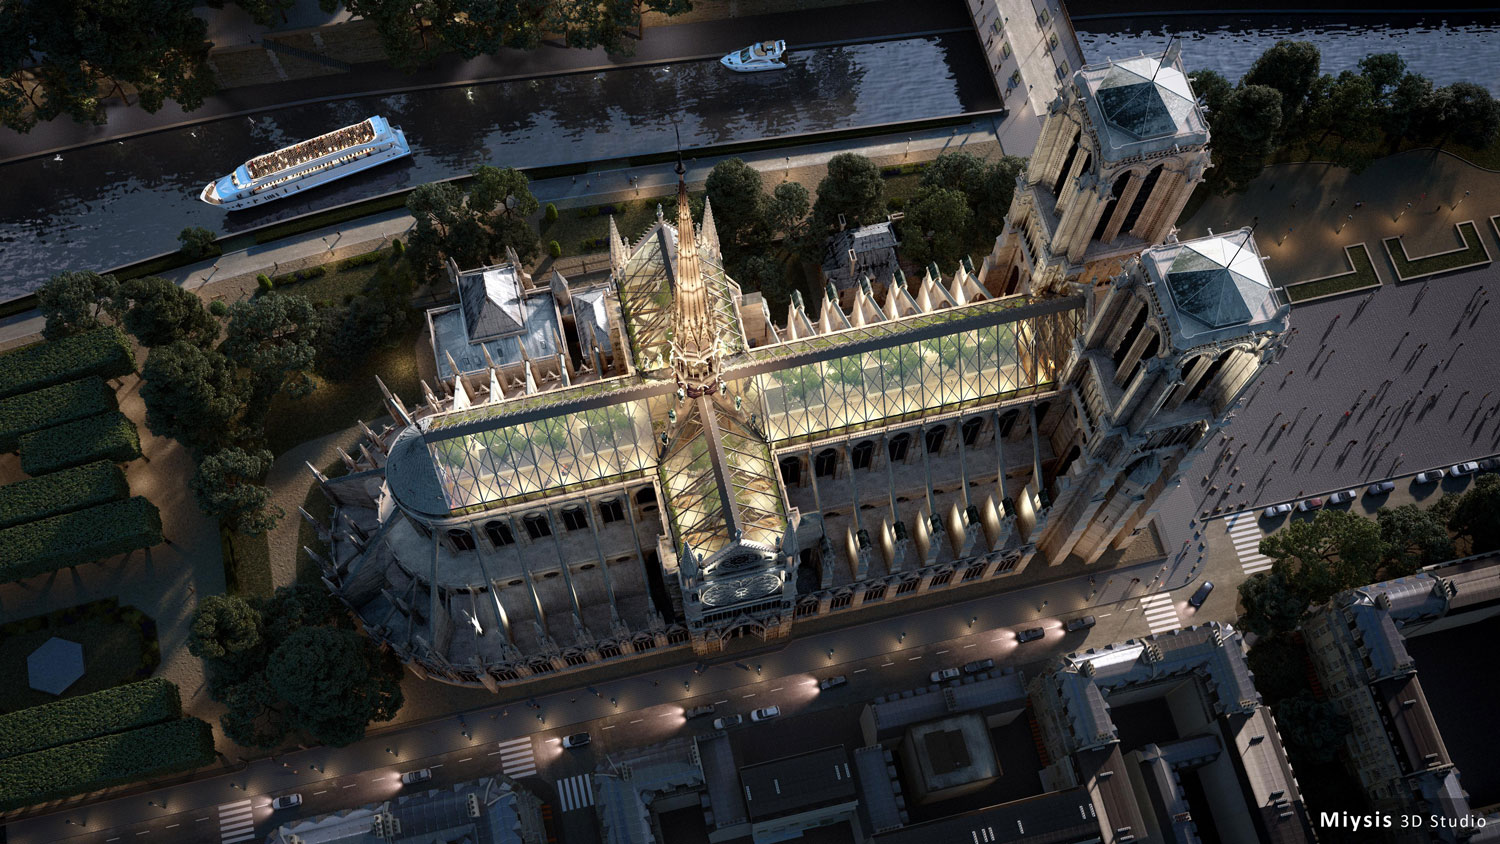 Miysis Pays Tribute to Notre-Dame With A Glass Roofed Rendition